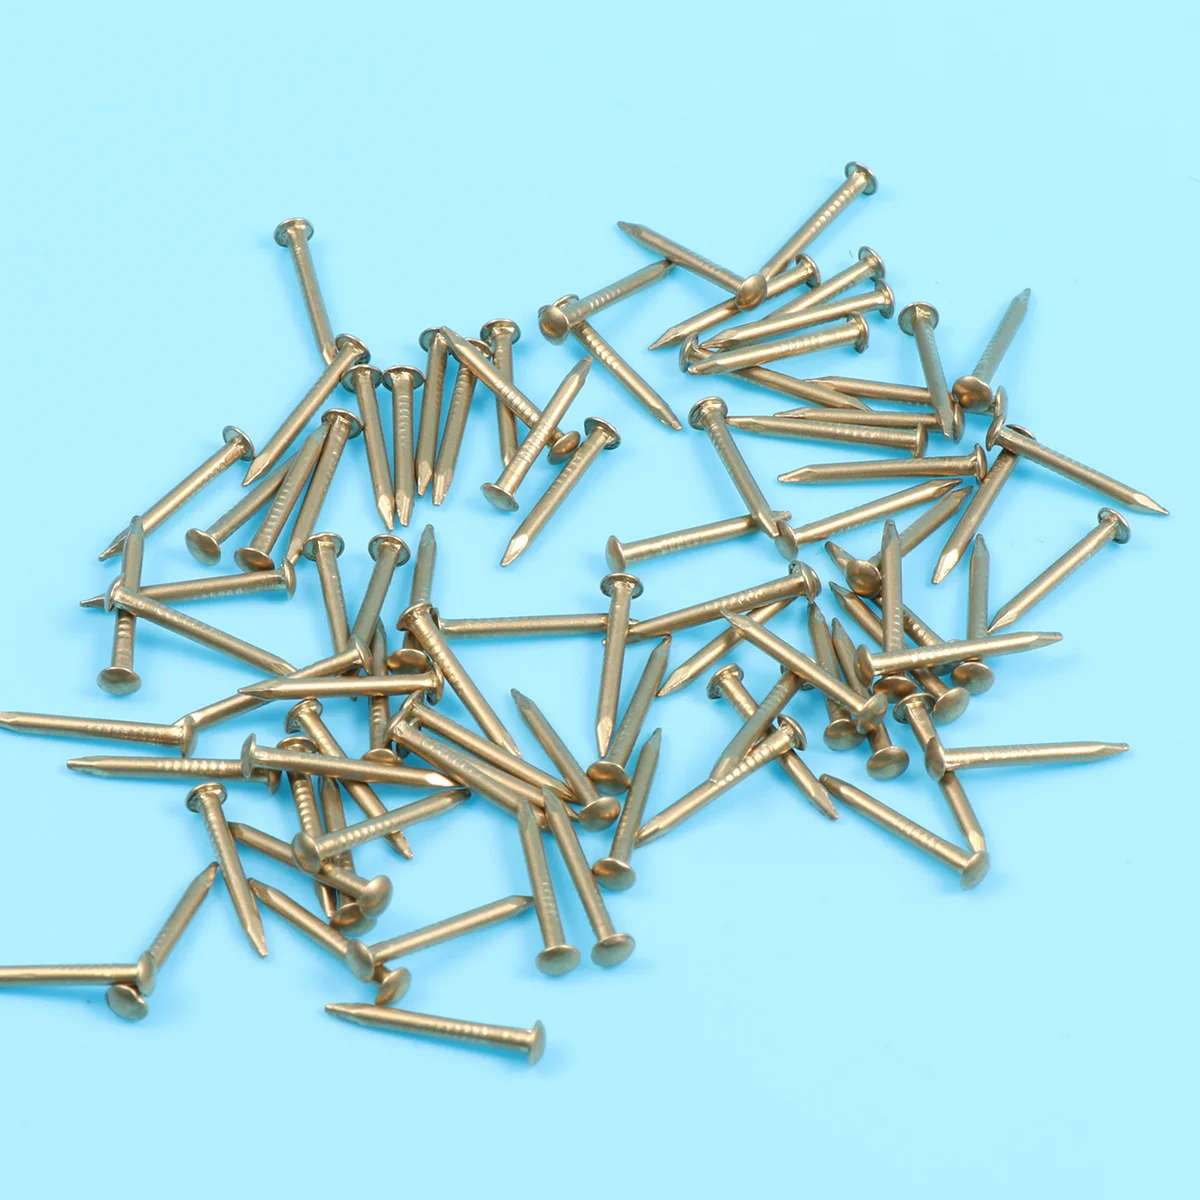 

100pcs 20mm Brass Nail Round Head Nails for Furniture DIY Small Hinges Decorative Boxes (Brass)